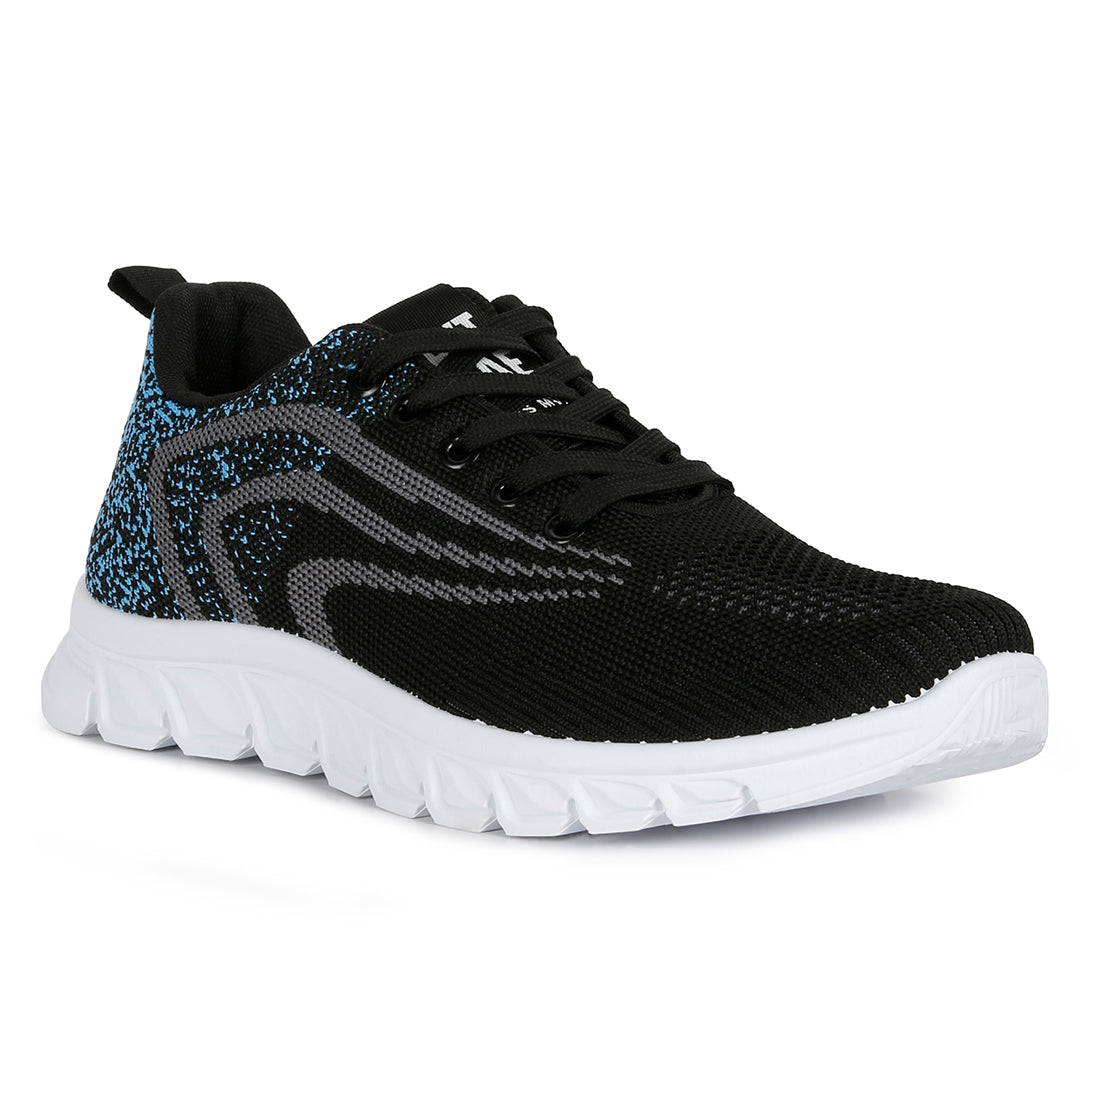 Men's Lace Up Knit Sneakers